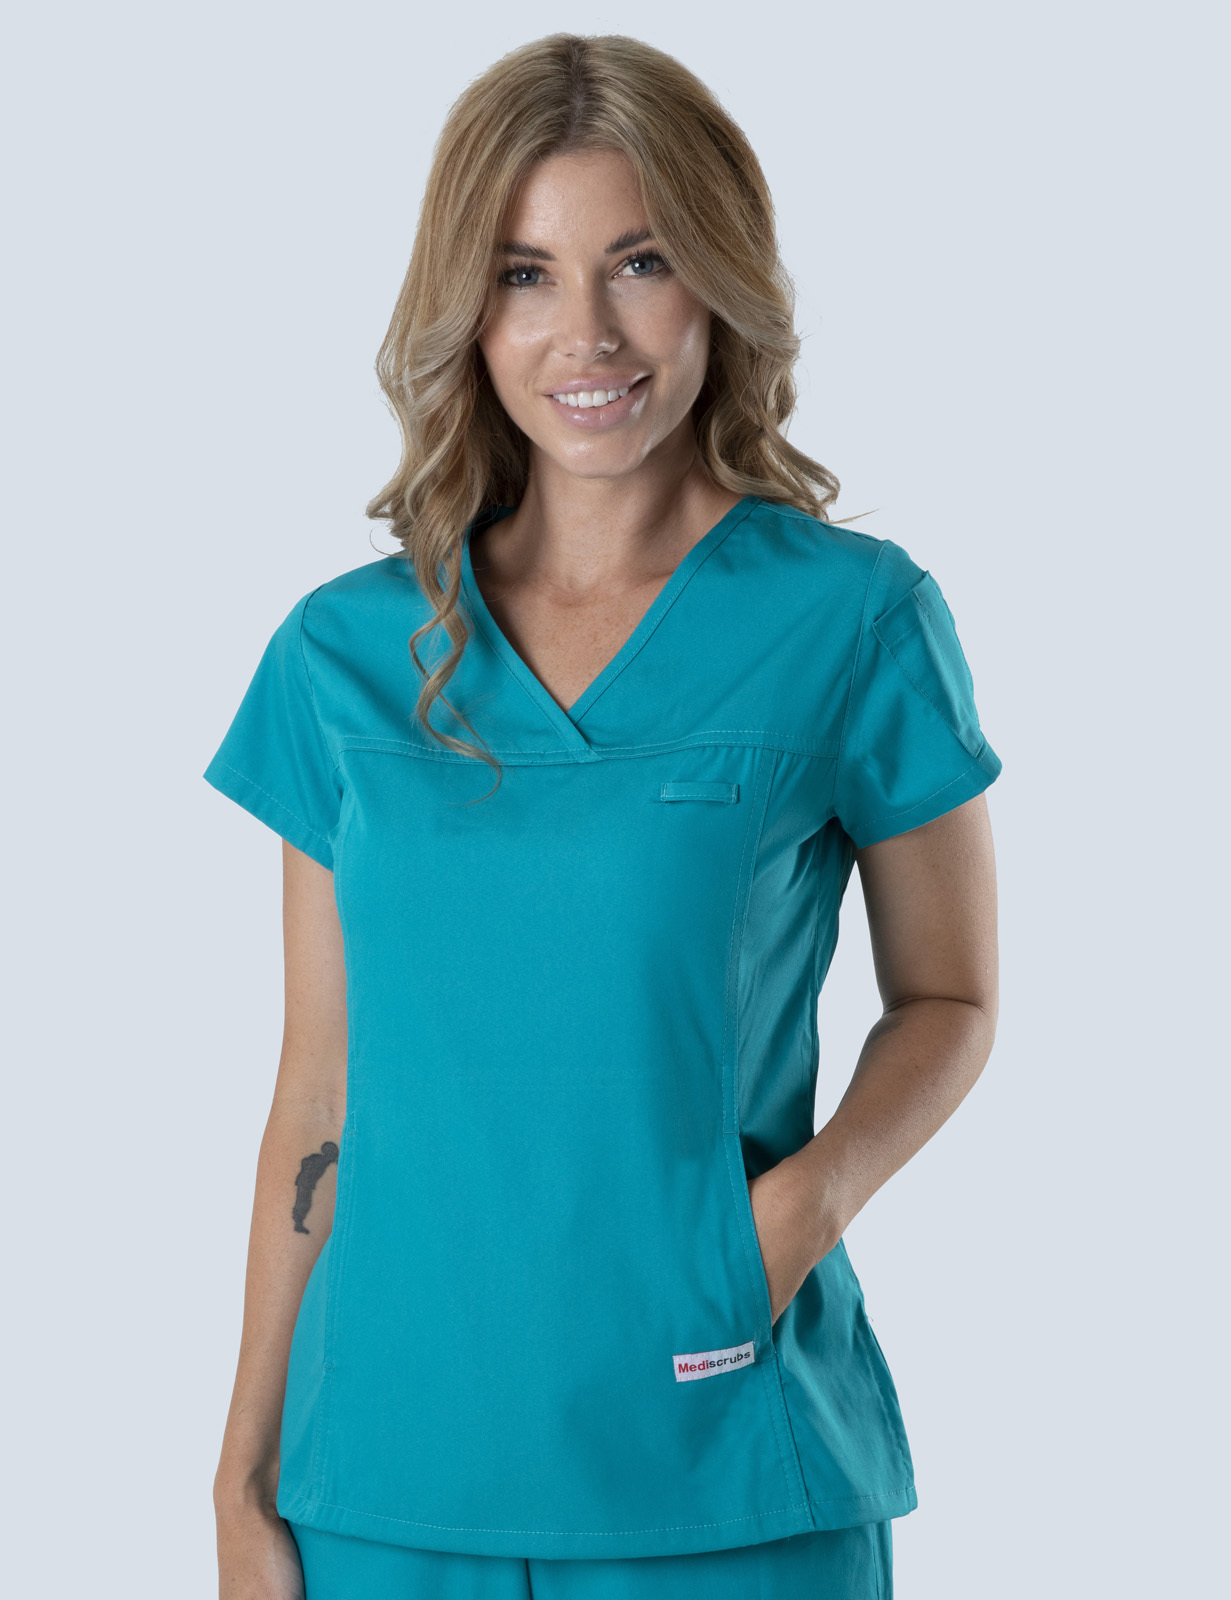 Caloundra Hospital AIN (Women's Fit Solid Scrub Top and Cargo Pants in Teal incl Logos)